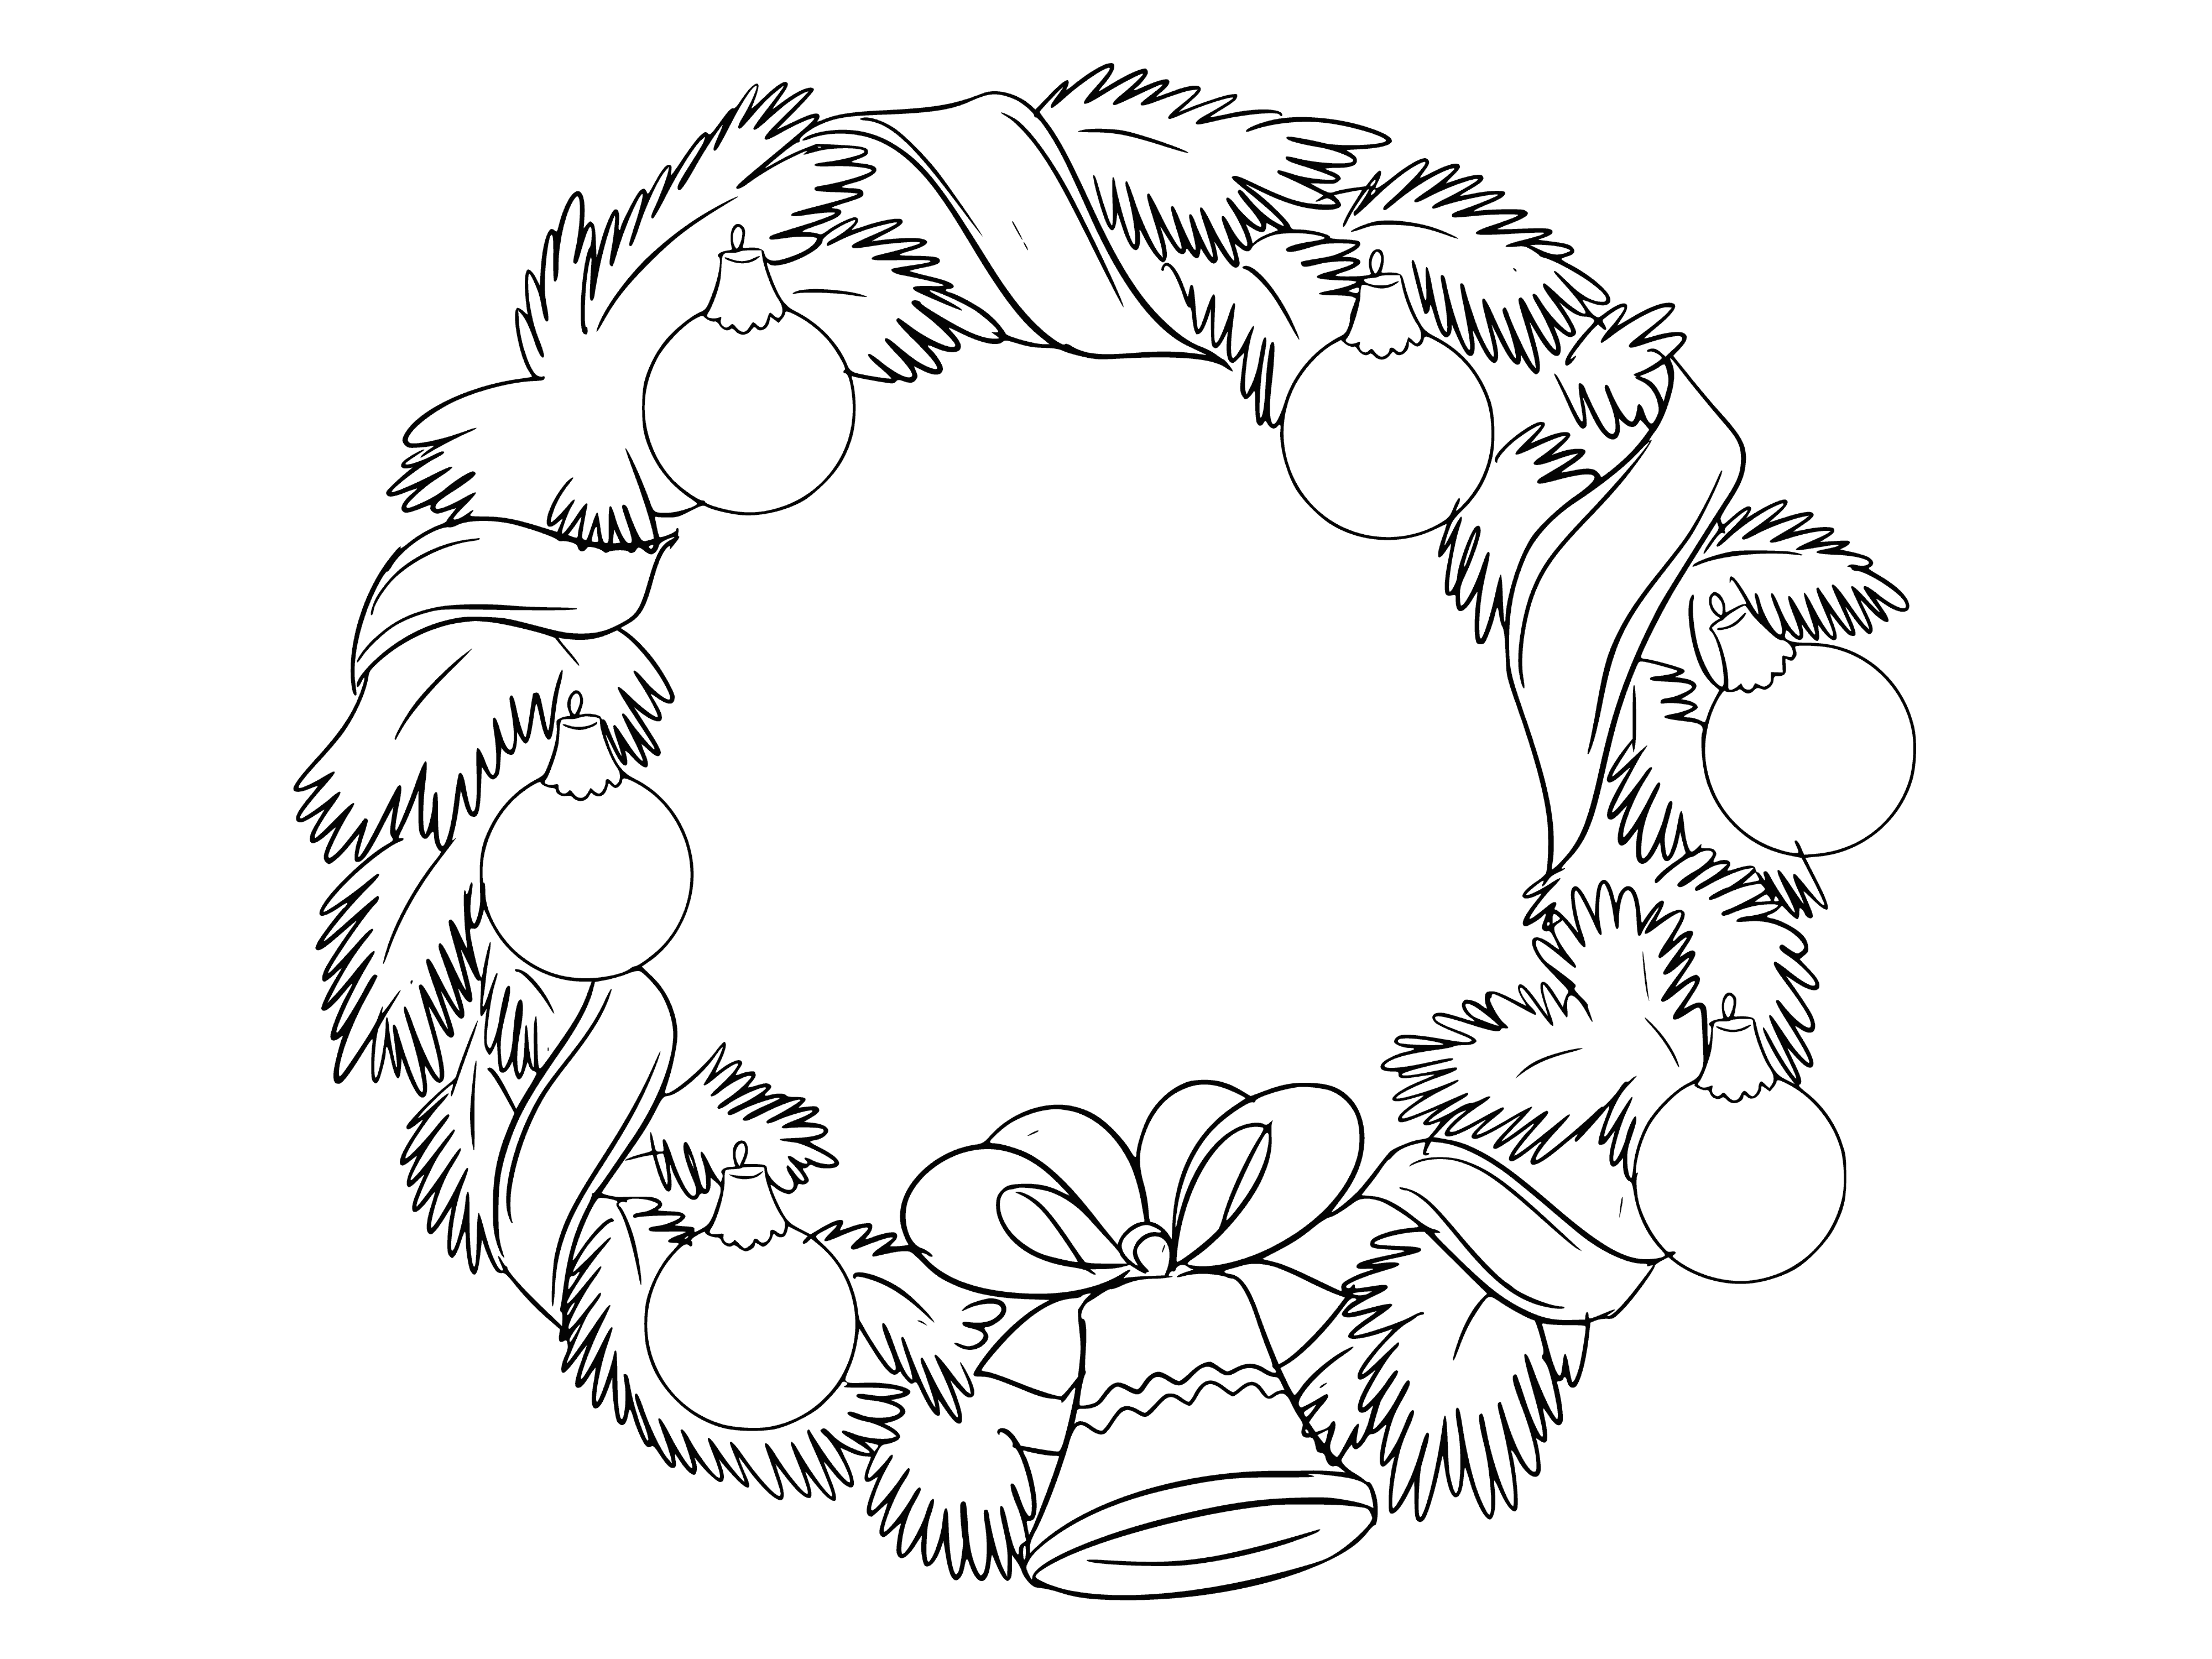 2 wreaths w/ green leaves, red berries & gold stars in center. Perfect for coloring to get into the holiday spirit!